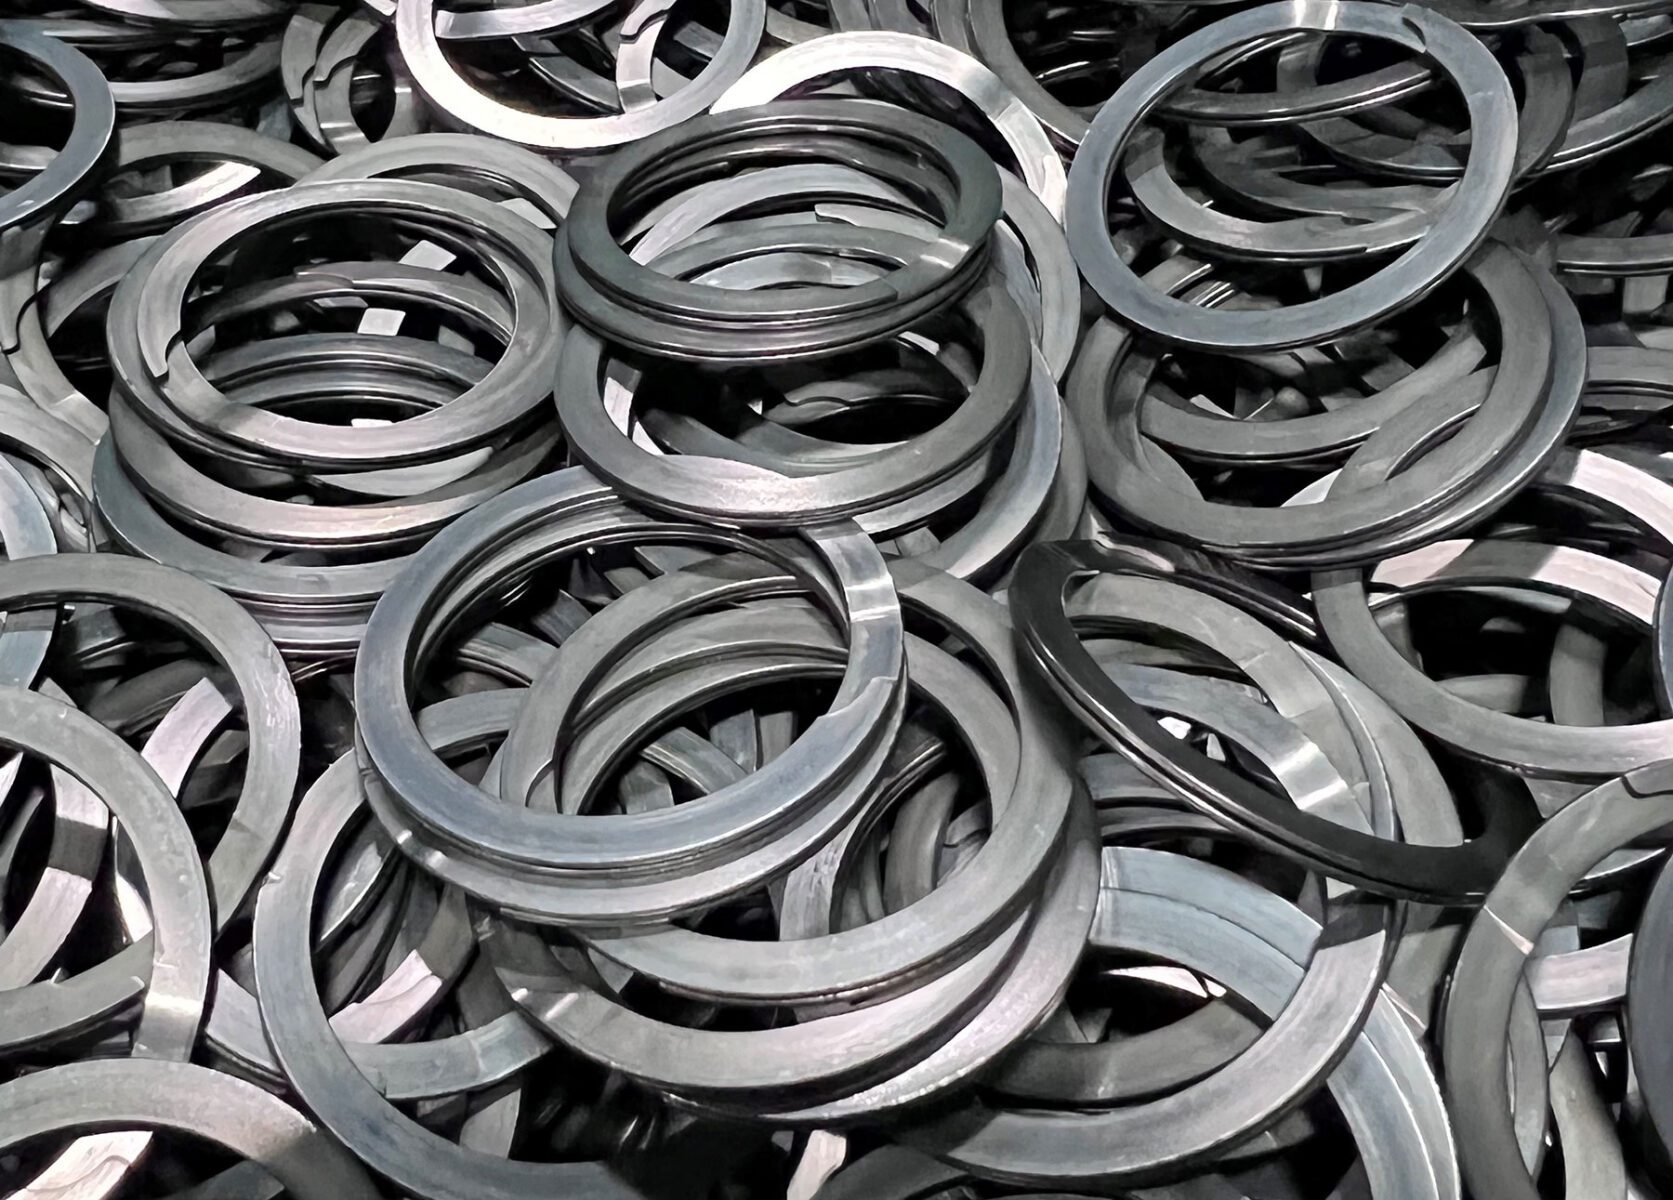 Retaining rings for shafts and bores